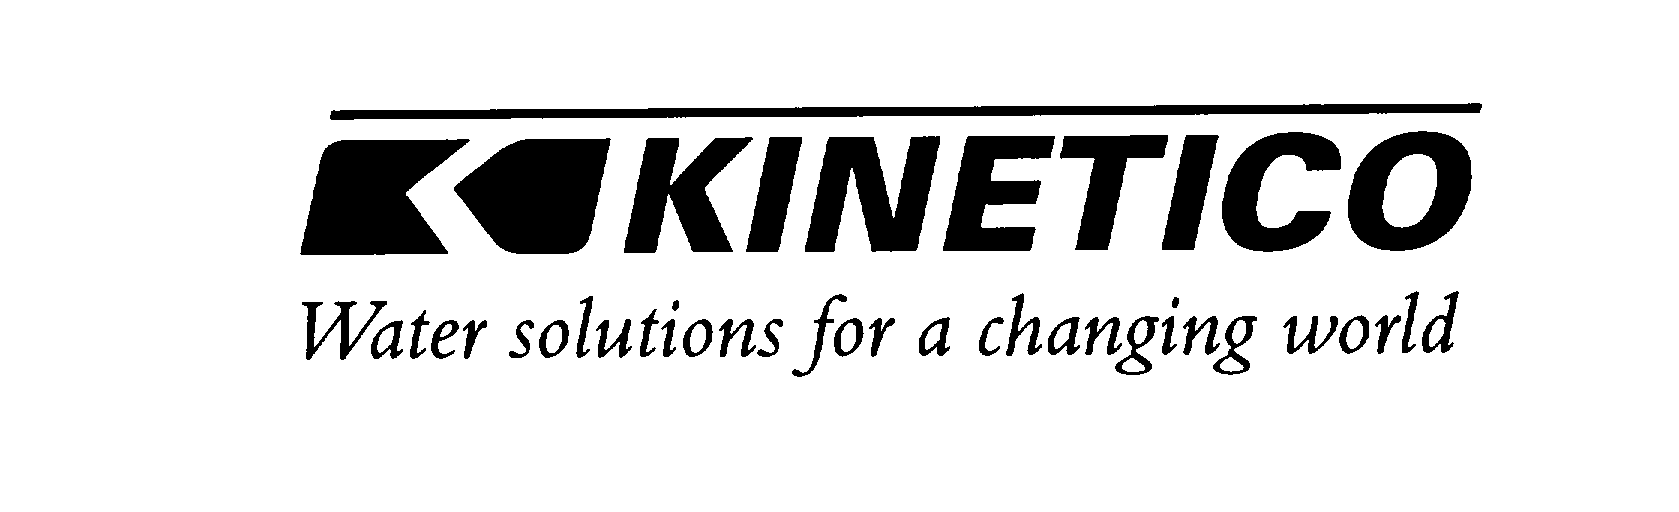  KINETICO WATER SOLUTIONS FOR A CHANGING WORLD